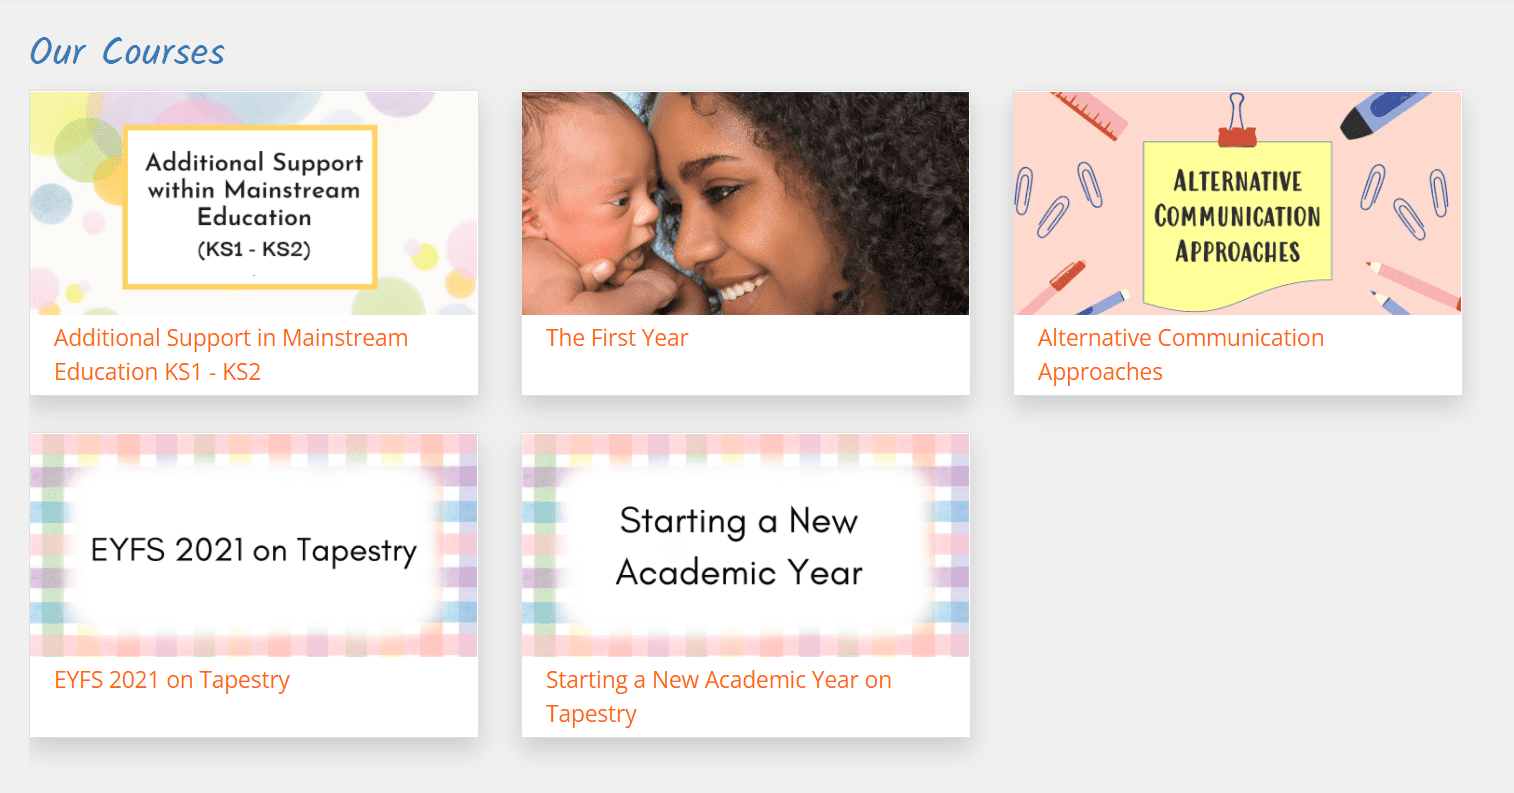 The available courses at release: Additional Support in Mainstream Education KS1 - KS2, The First Year, Communication Approaches, EYFS 2021 on Tapestry, and Starting a New Academic Year on Tapestry